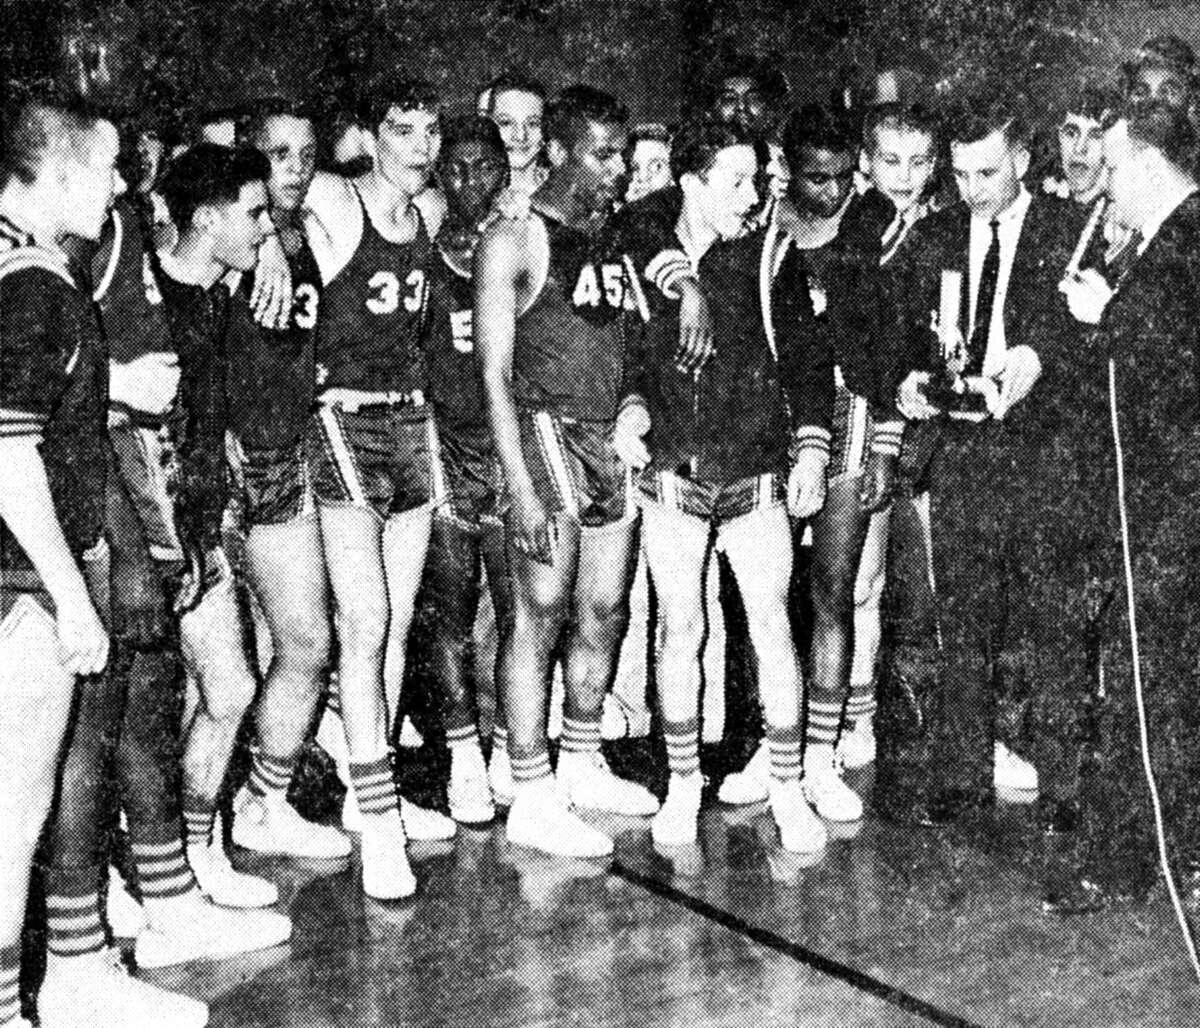 Ken Rutherford, Manistee High School basketball coach (far right), is presents the Class D district championship trophy to coach Doyle Eckhardt of the Norman-Dickson Norsemen who won the district tournament game against the Onekama Portagers Saturday night at the Armory. The photo was published in the News Advocate on March 11, 1963.